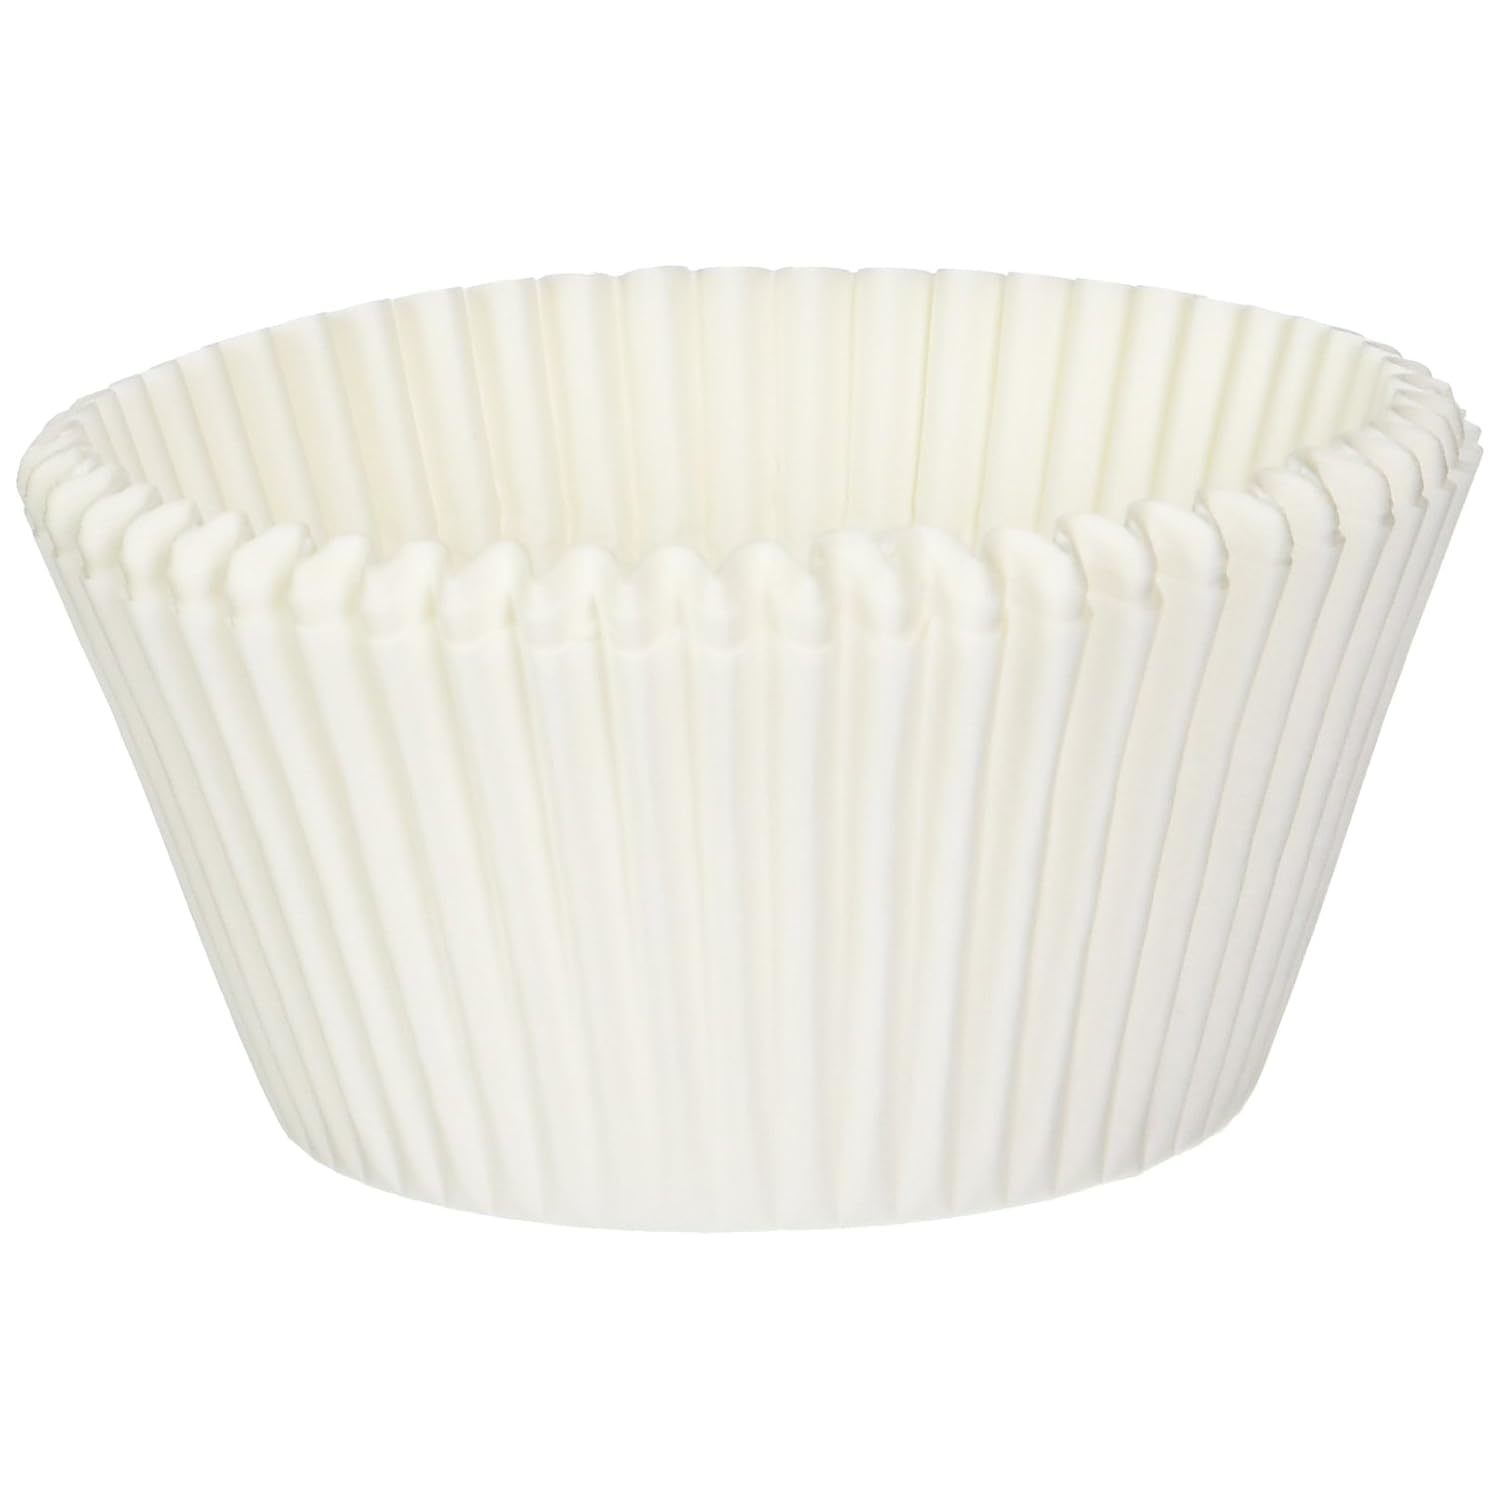 Norpro Giant Muffin Cups, White, Pack of 500, 2.75 x 2 inches (3600B) - $34.19